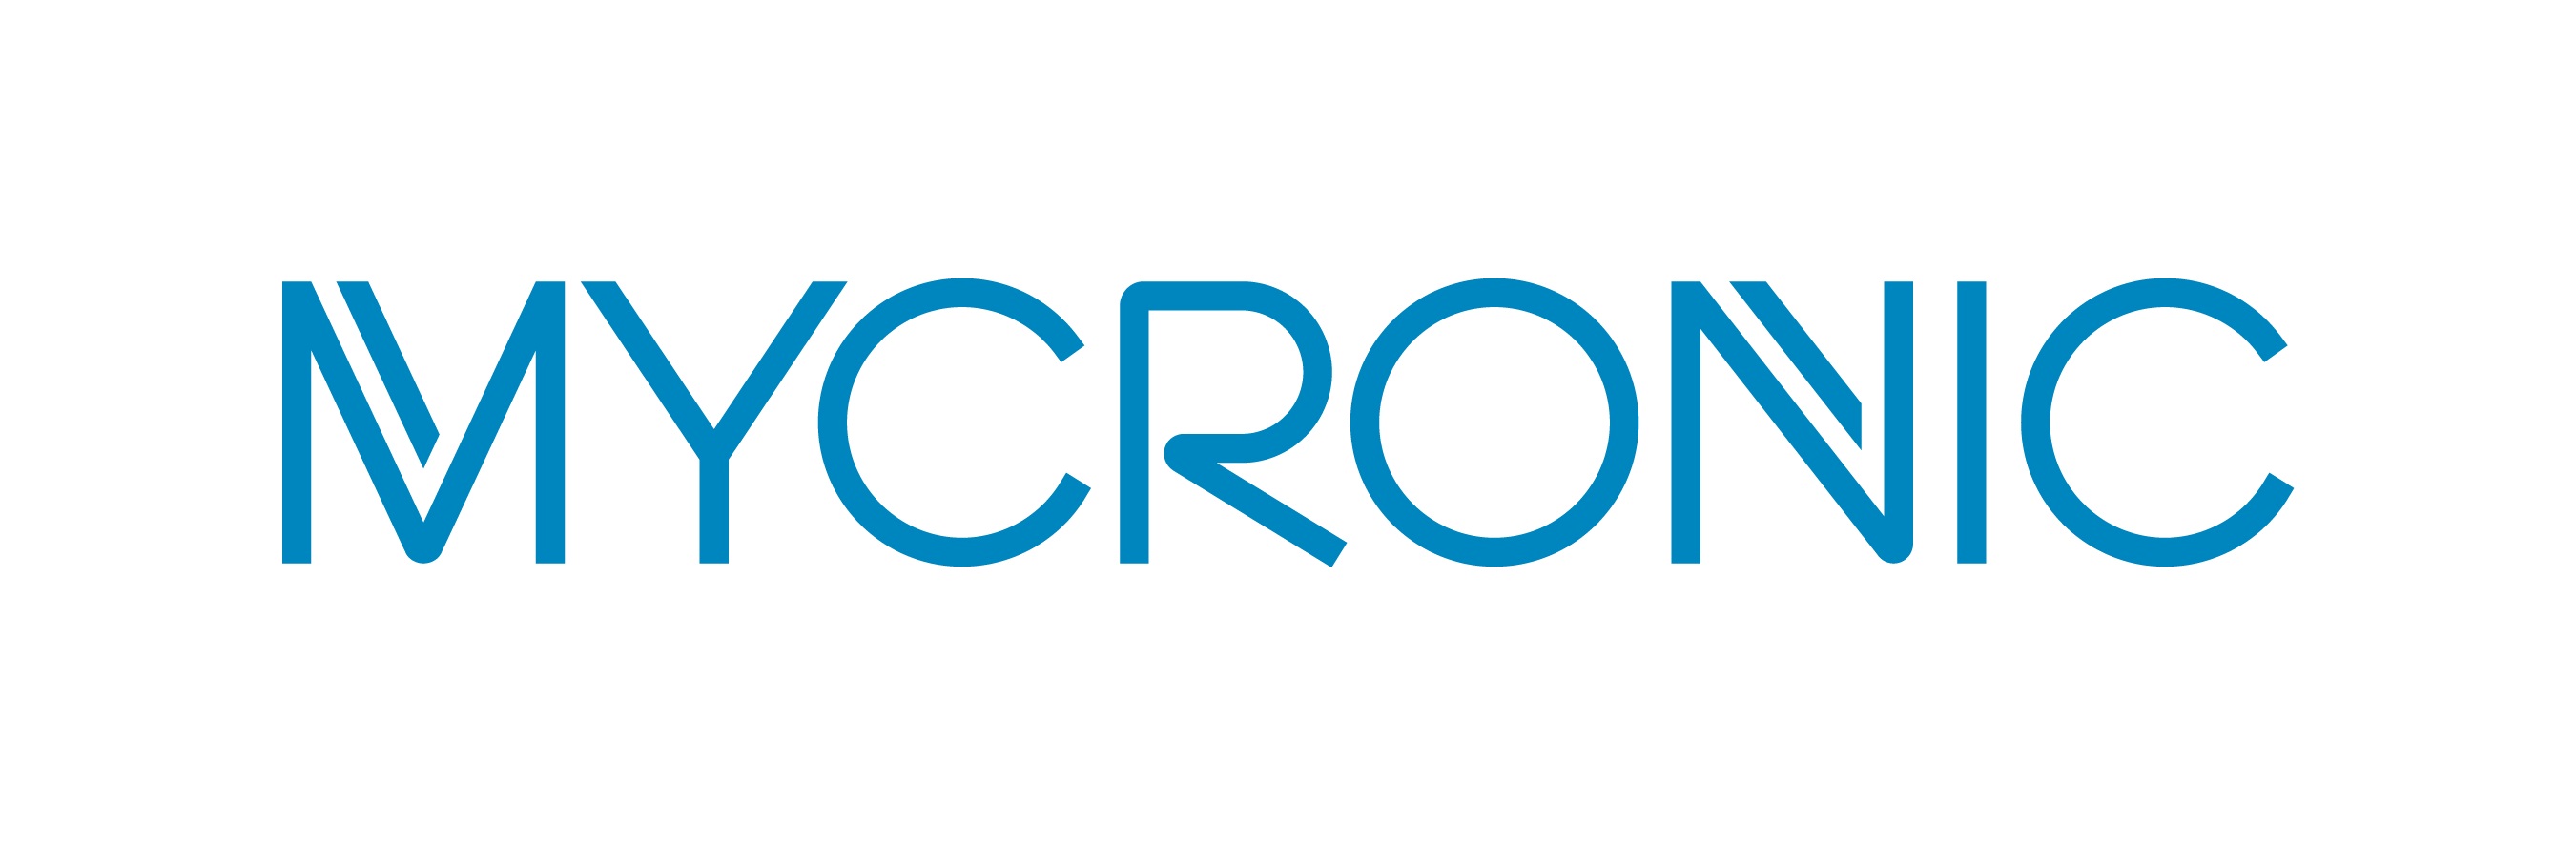 Technical Project Manager to Mycronic